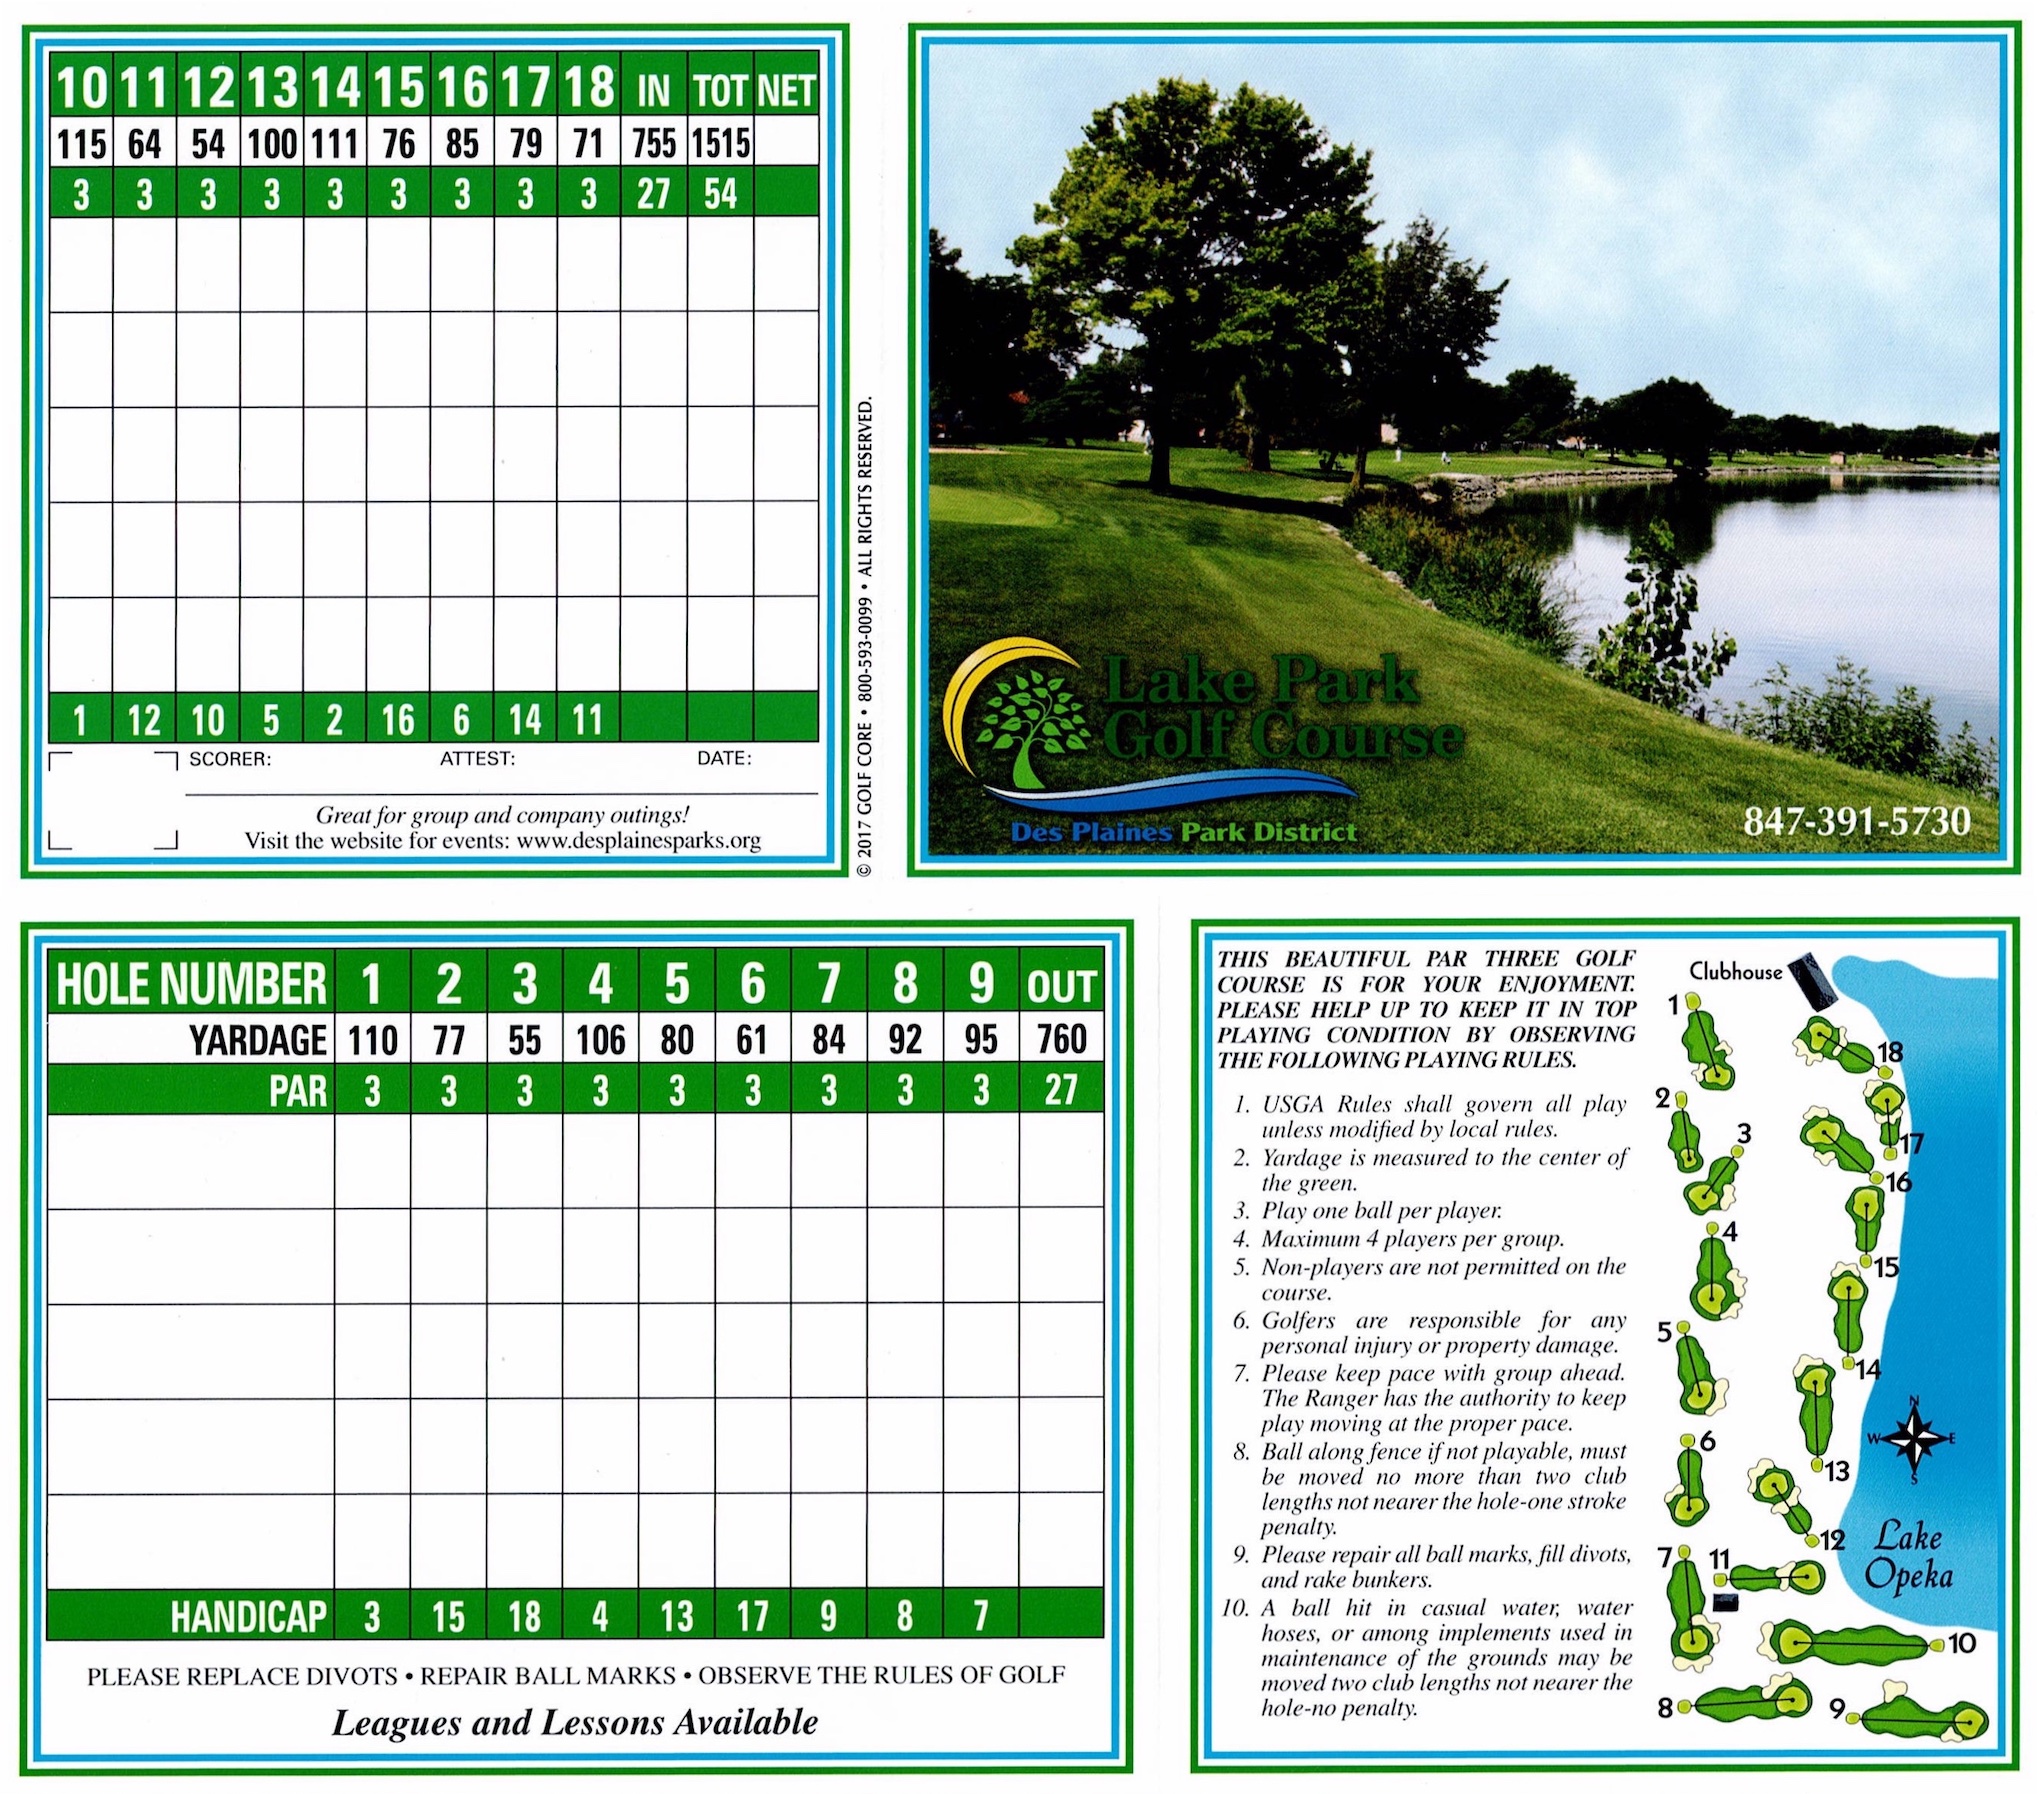 Scan of the scorecard from Lake Park Golf Course in Des Plaines, Illinois. 